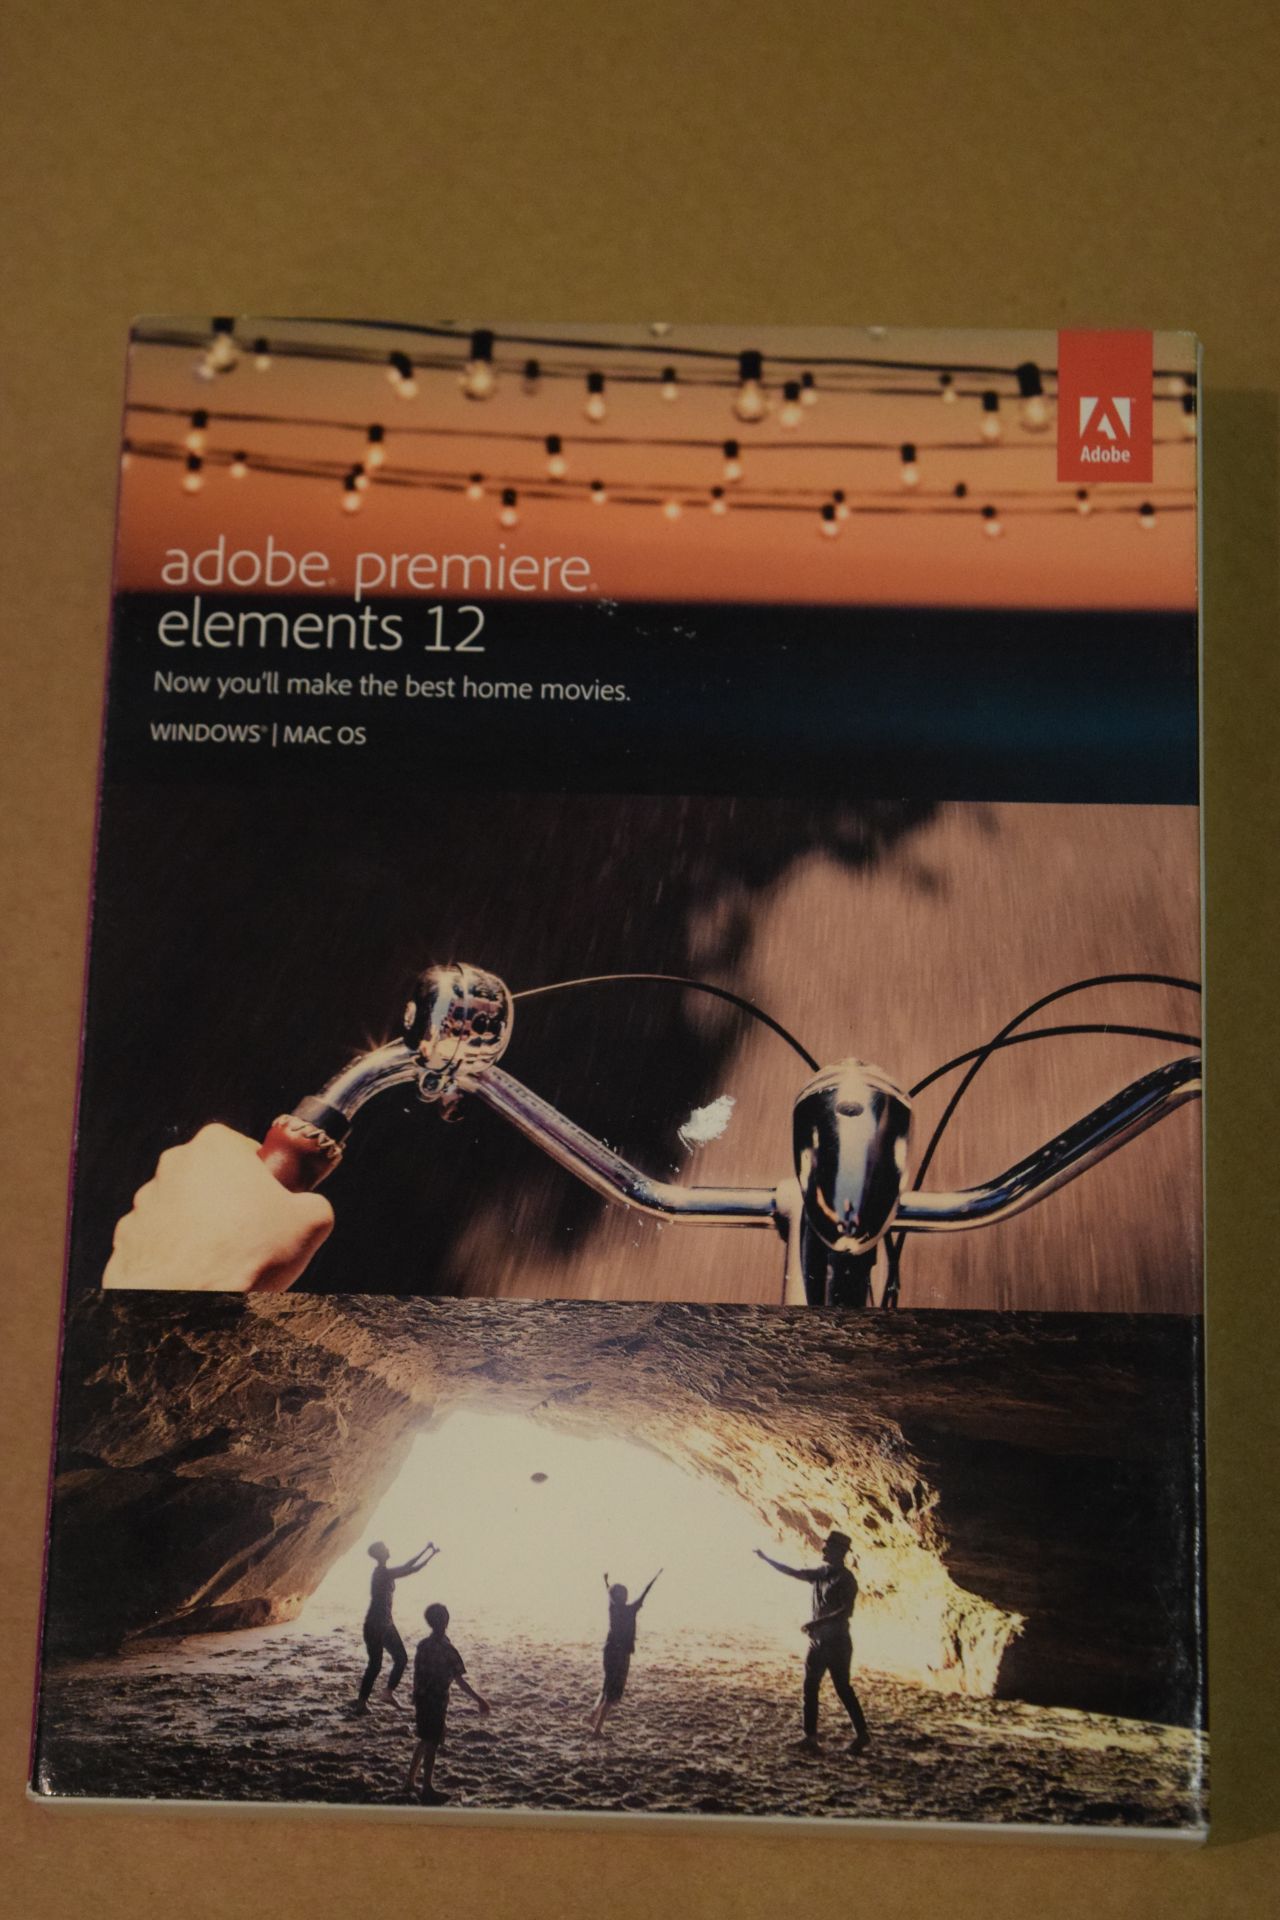 1 X BOXED ADOBE ELEMENT 12 FOR WINDOWS AND MAC OS RRP £100 23.11.16 (AC)